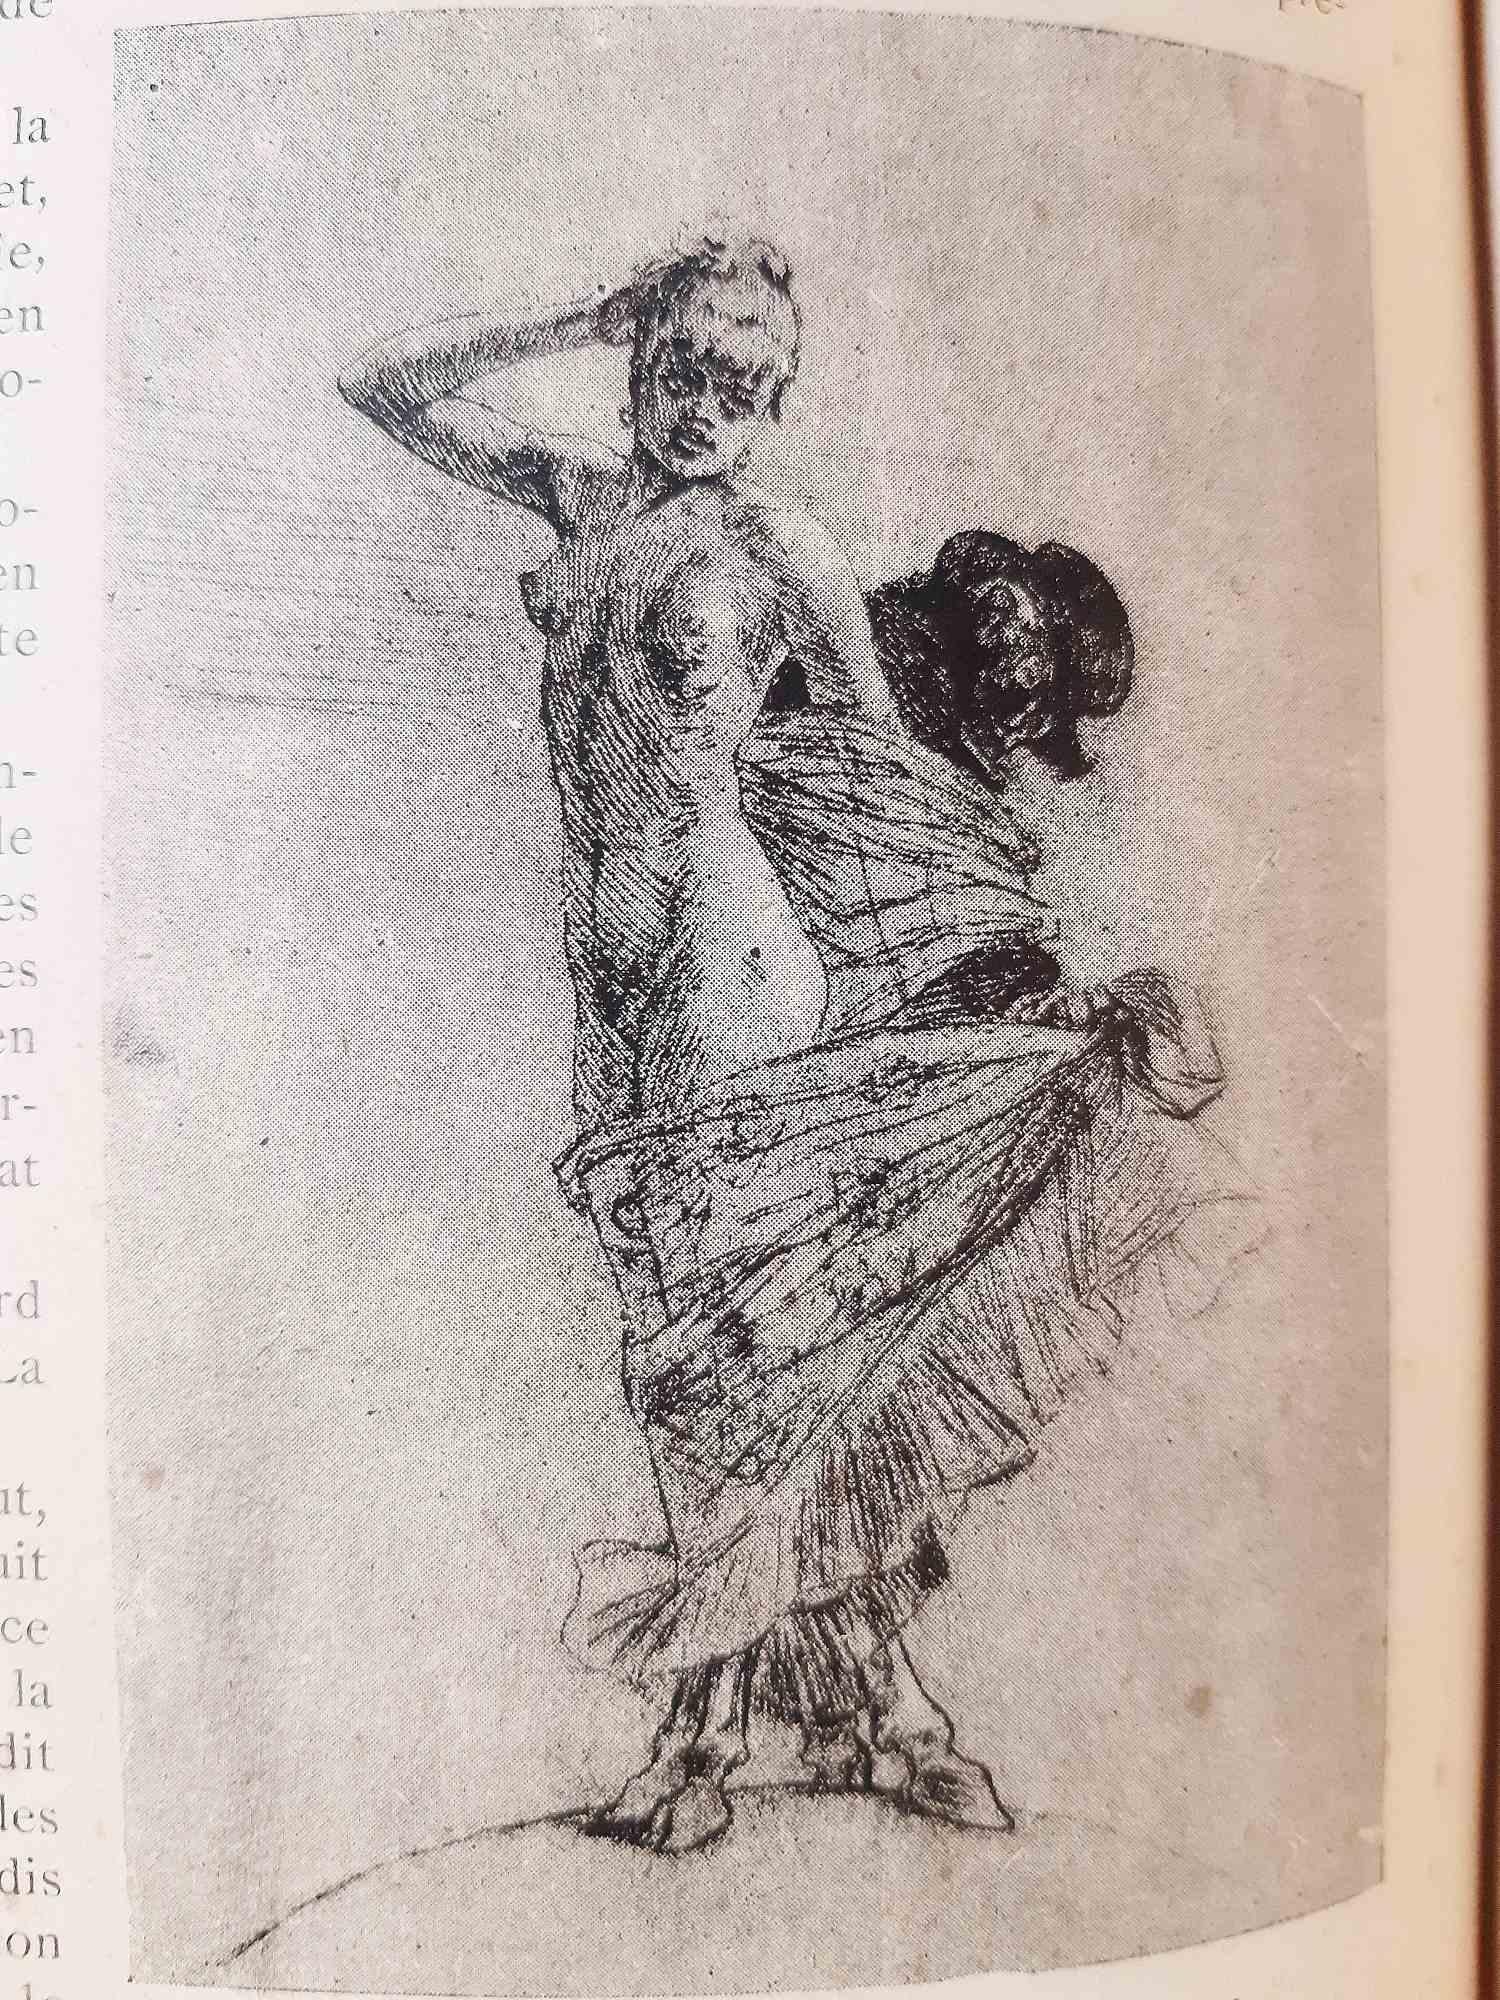 Revue La Plume n° 172 is an original Modern rare Book illustrated by Félicien Rops (7 July 1833 – 23 August 1898) in 1896.

Original Edition.

Published by La Plume, Paris.

Format: In 8°. The dimensions of the book are indicative.

The book is a